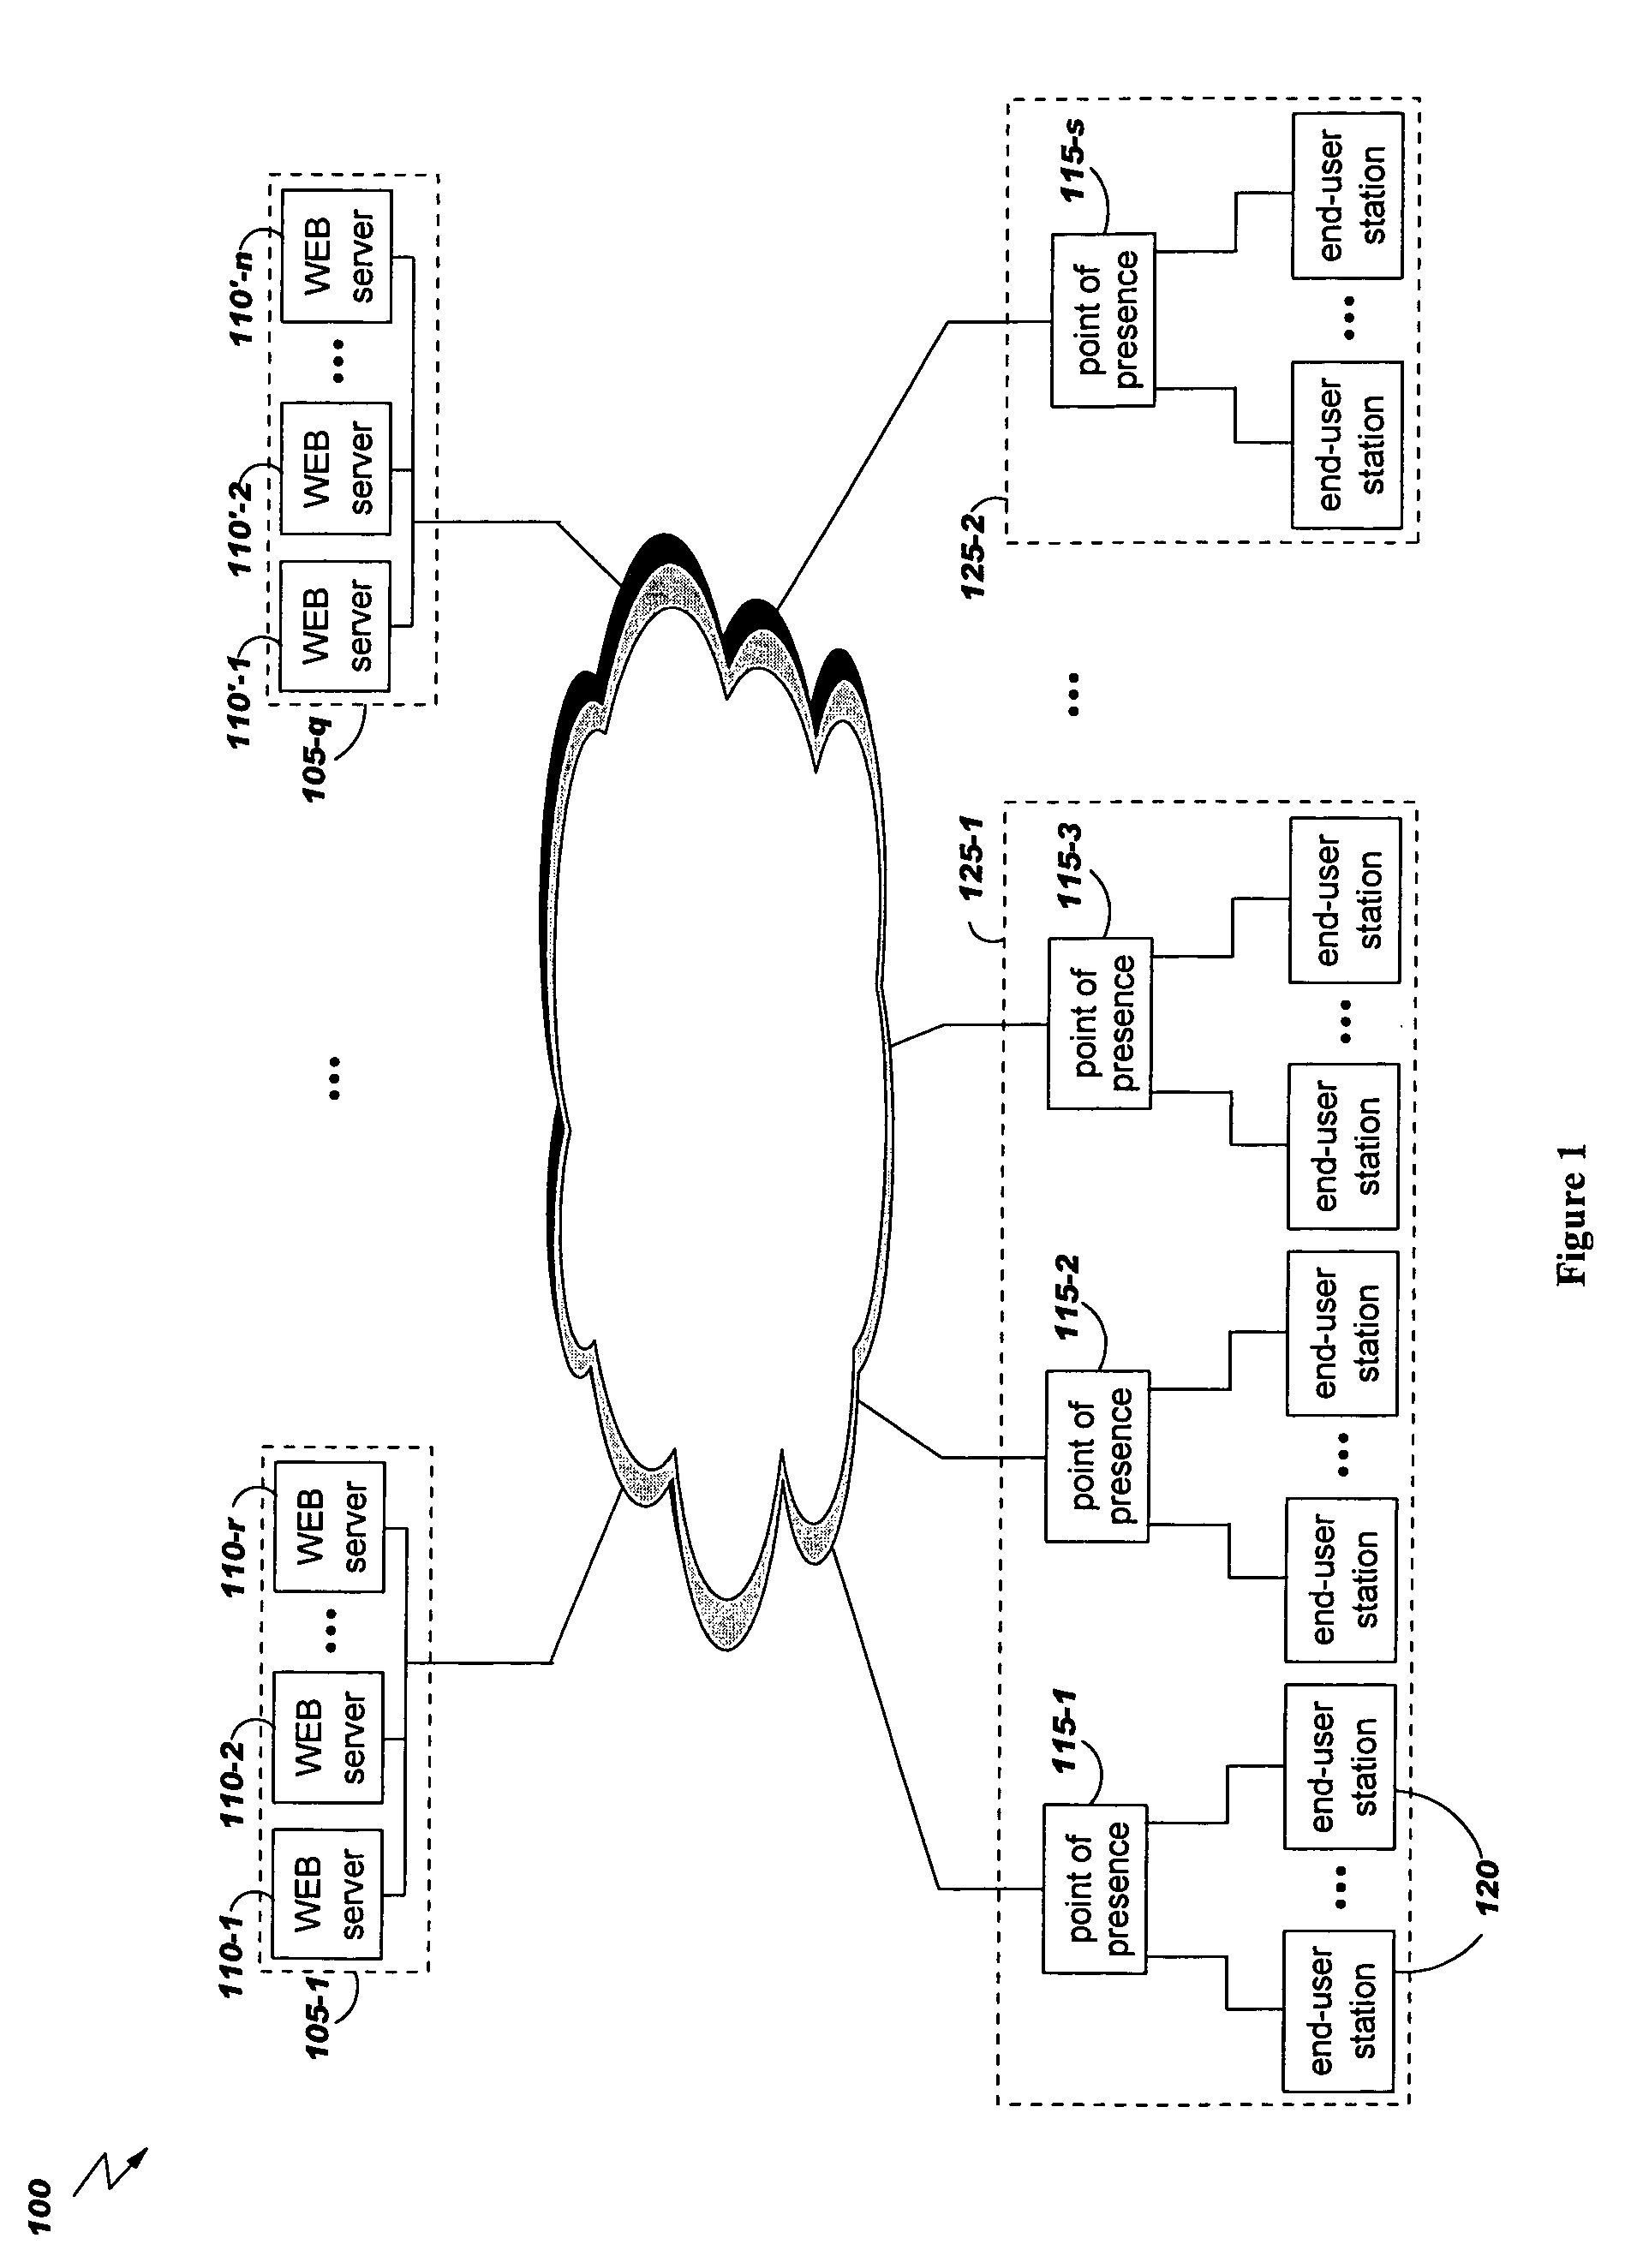 Method and system for billing network access capacities shared between internet service providers